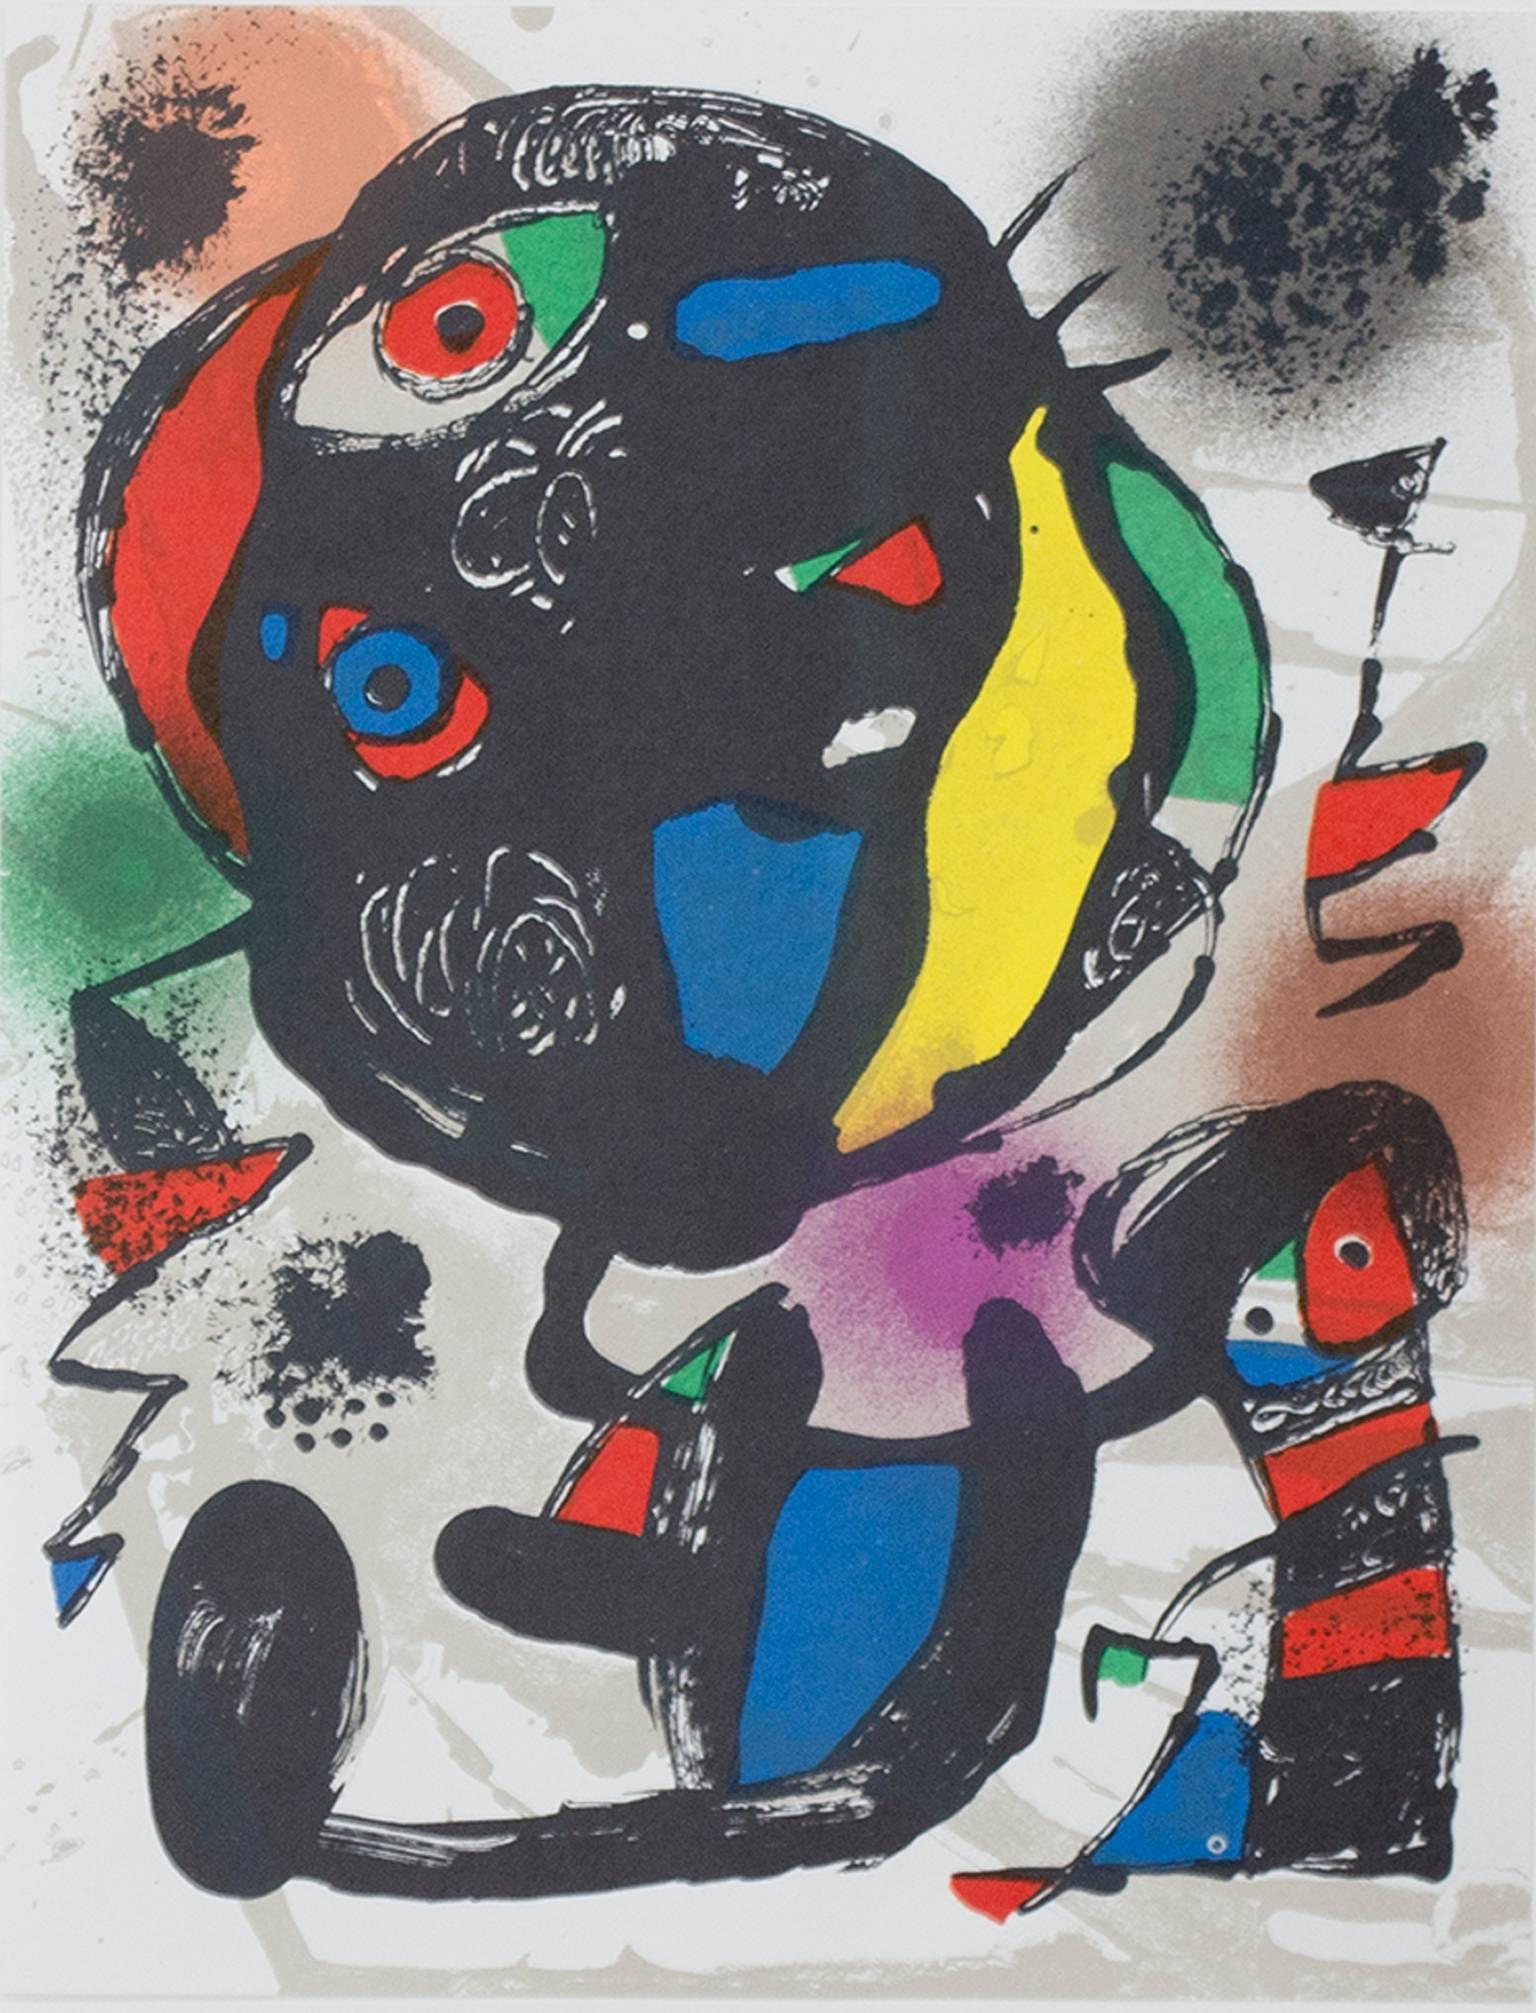 Lithographie Originale V from Miro Lithographs IV, Maeght Publisher by Joan Miró